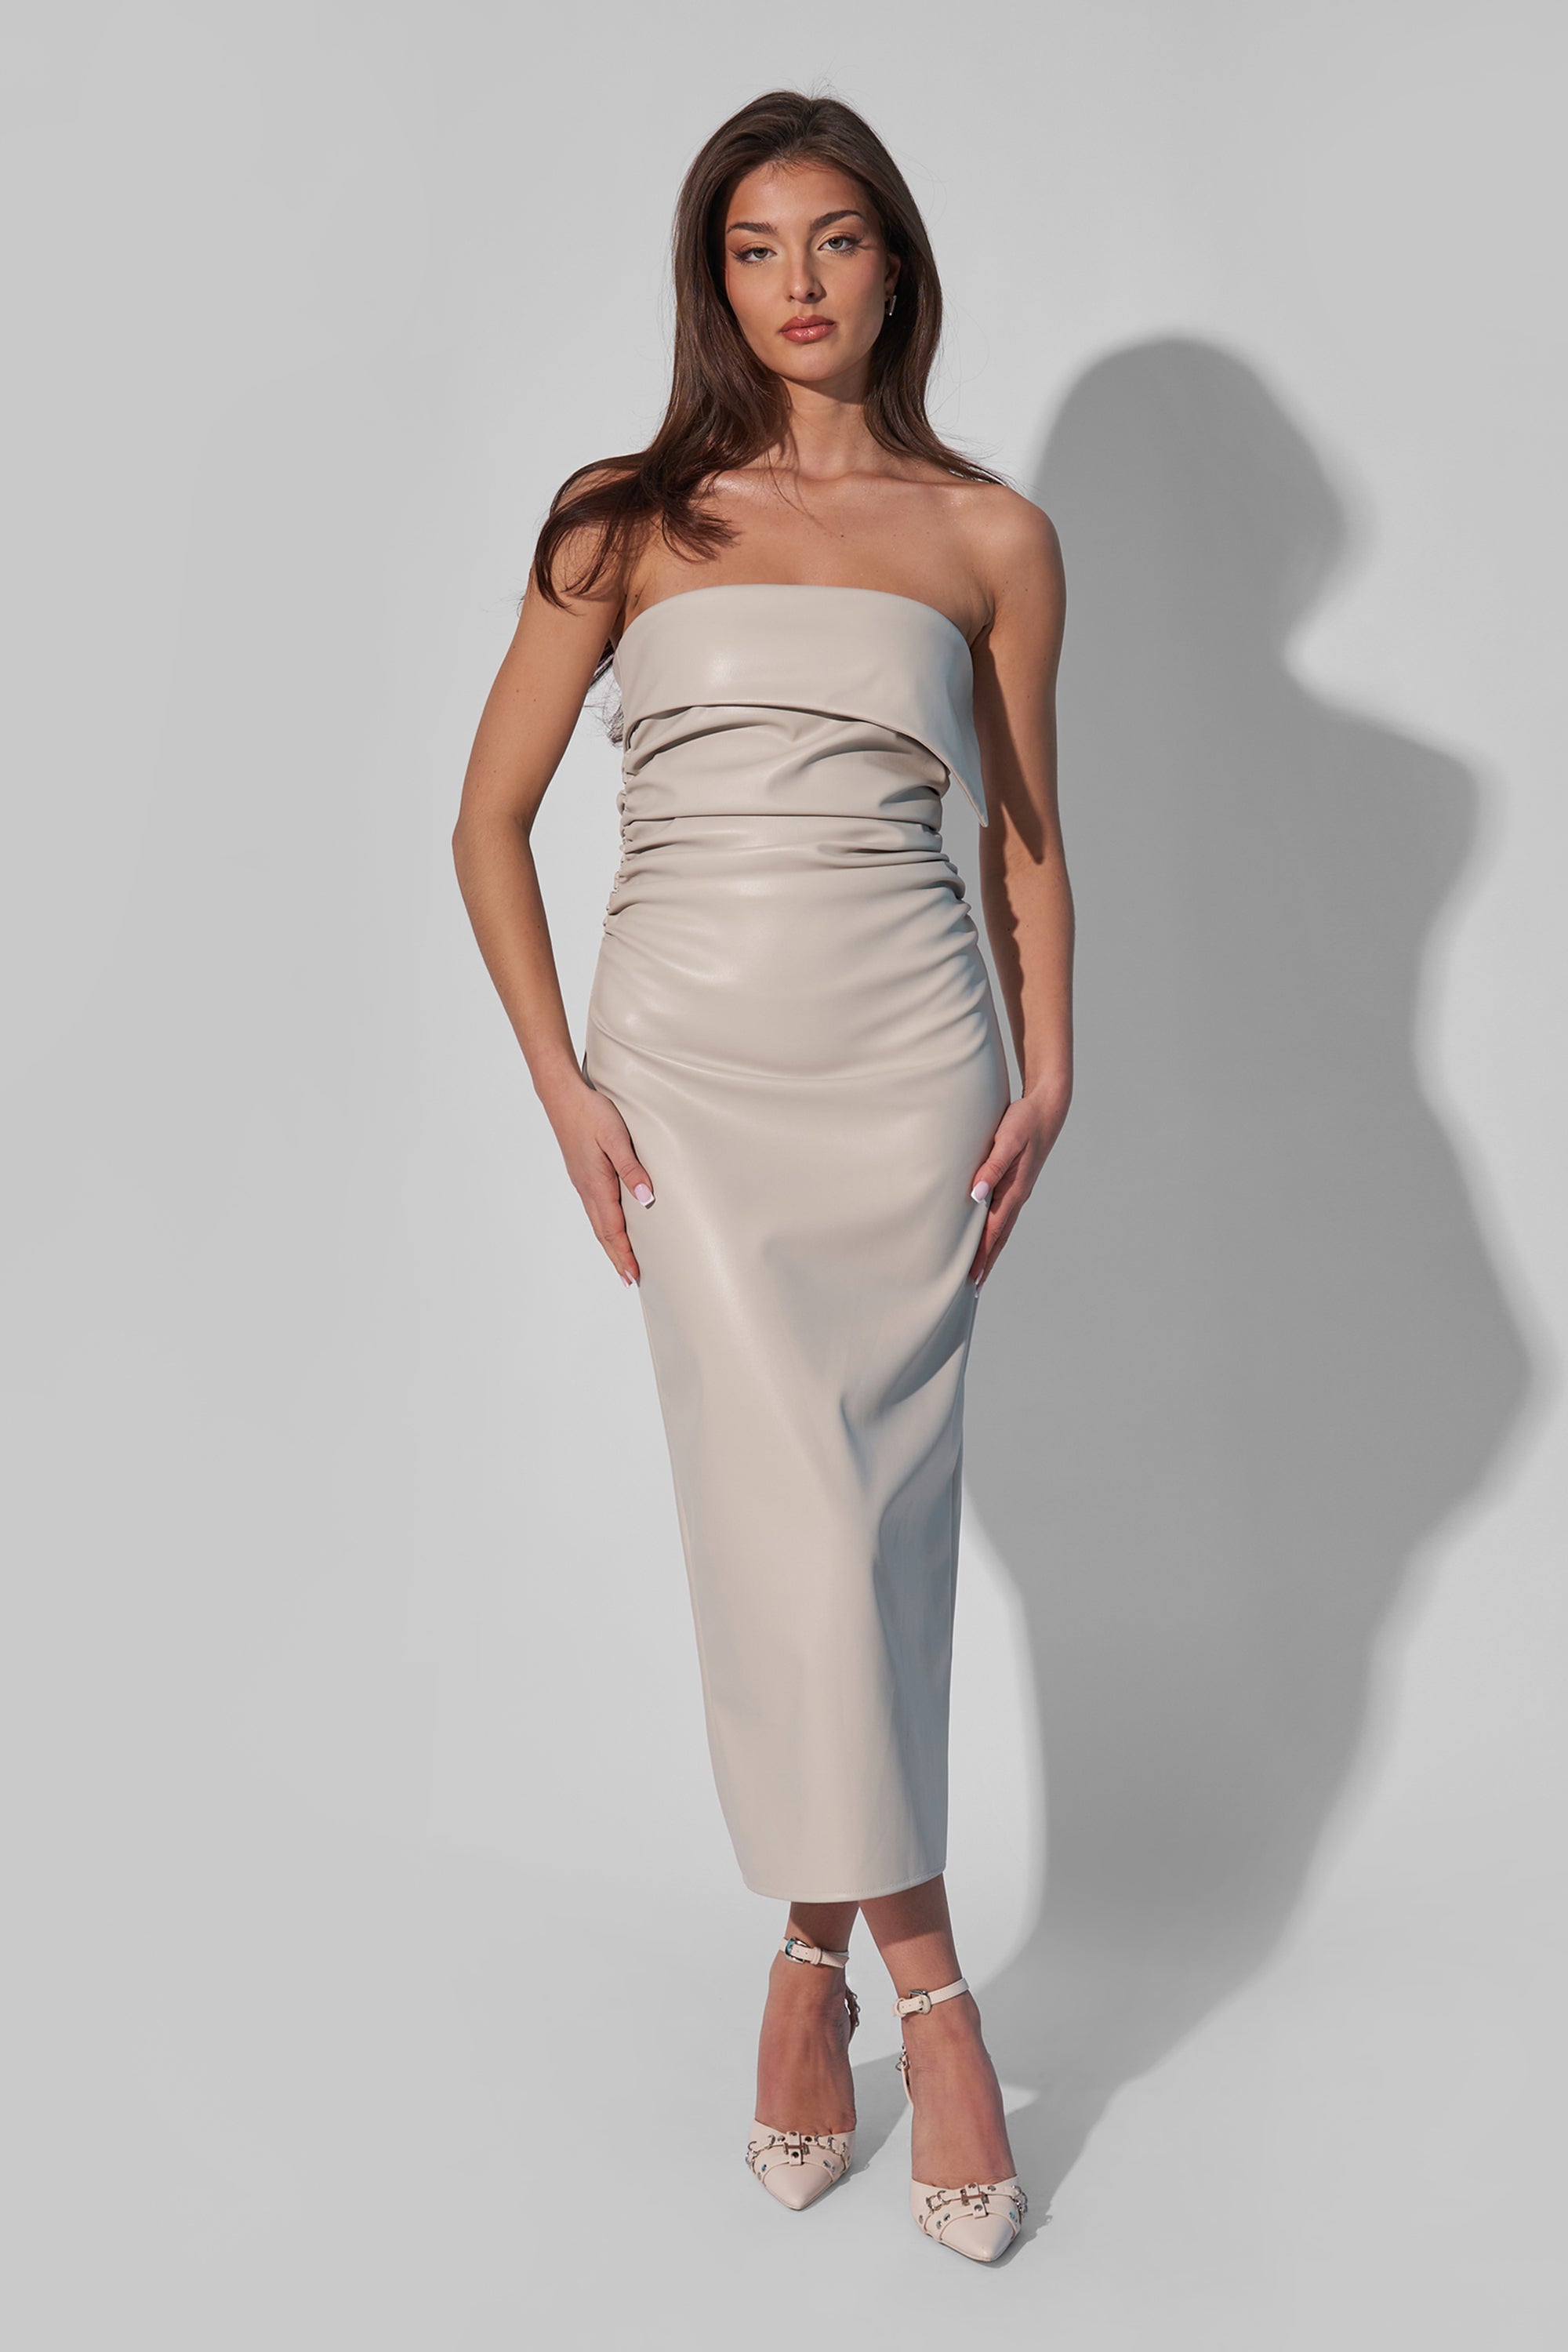 Image of Kaiia Leather Look Ruched Bandeau Midaxi Dress In Ecru UK 16